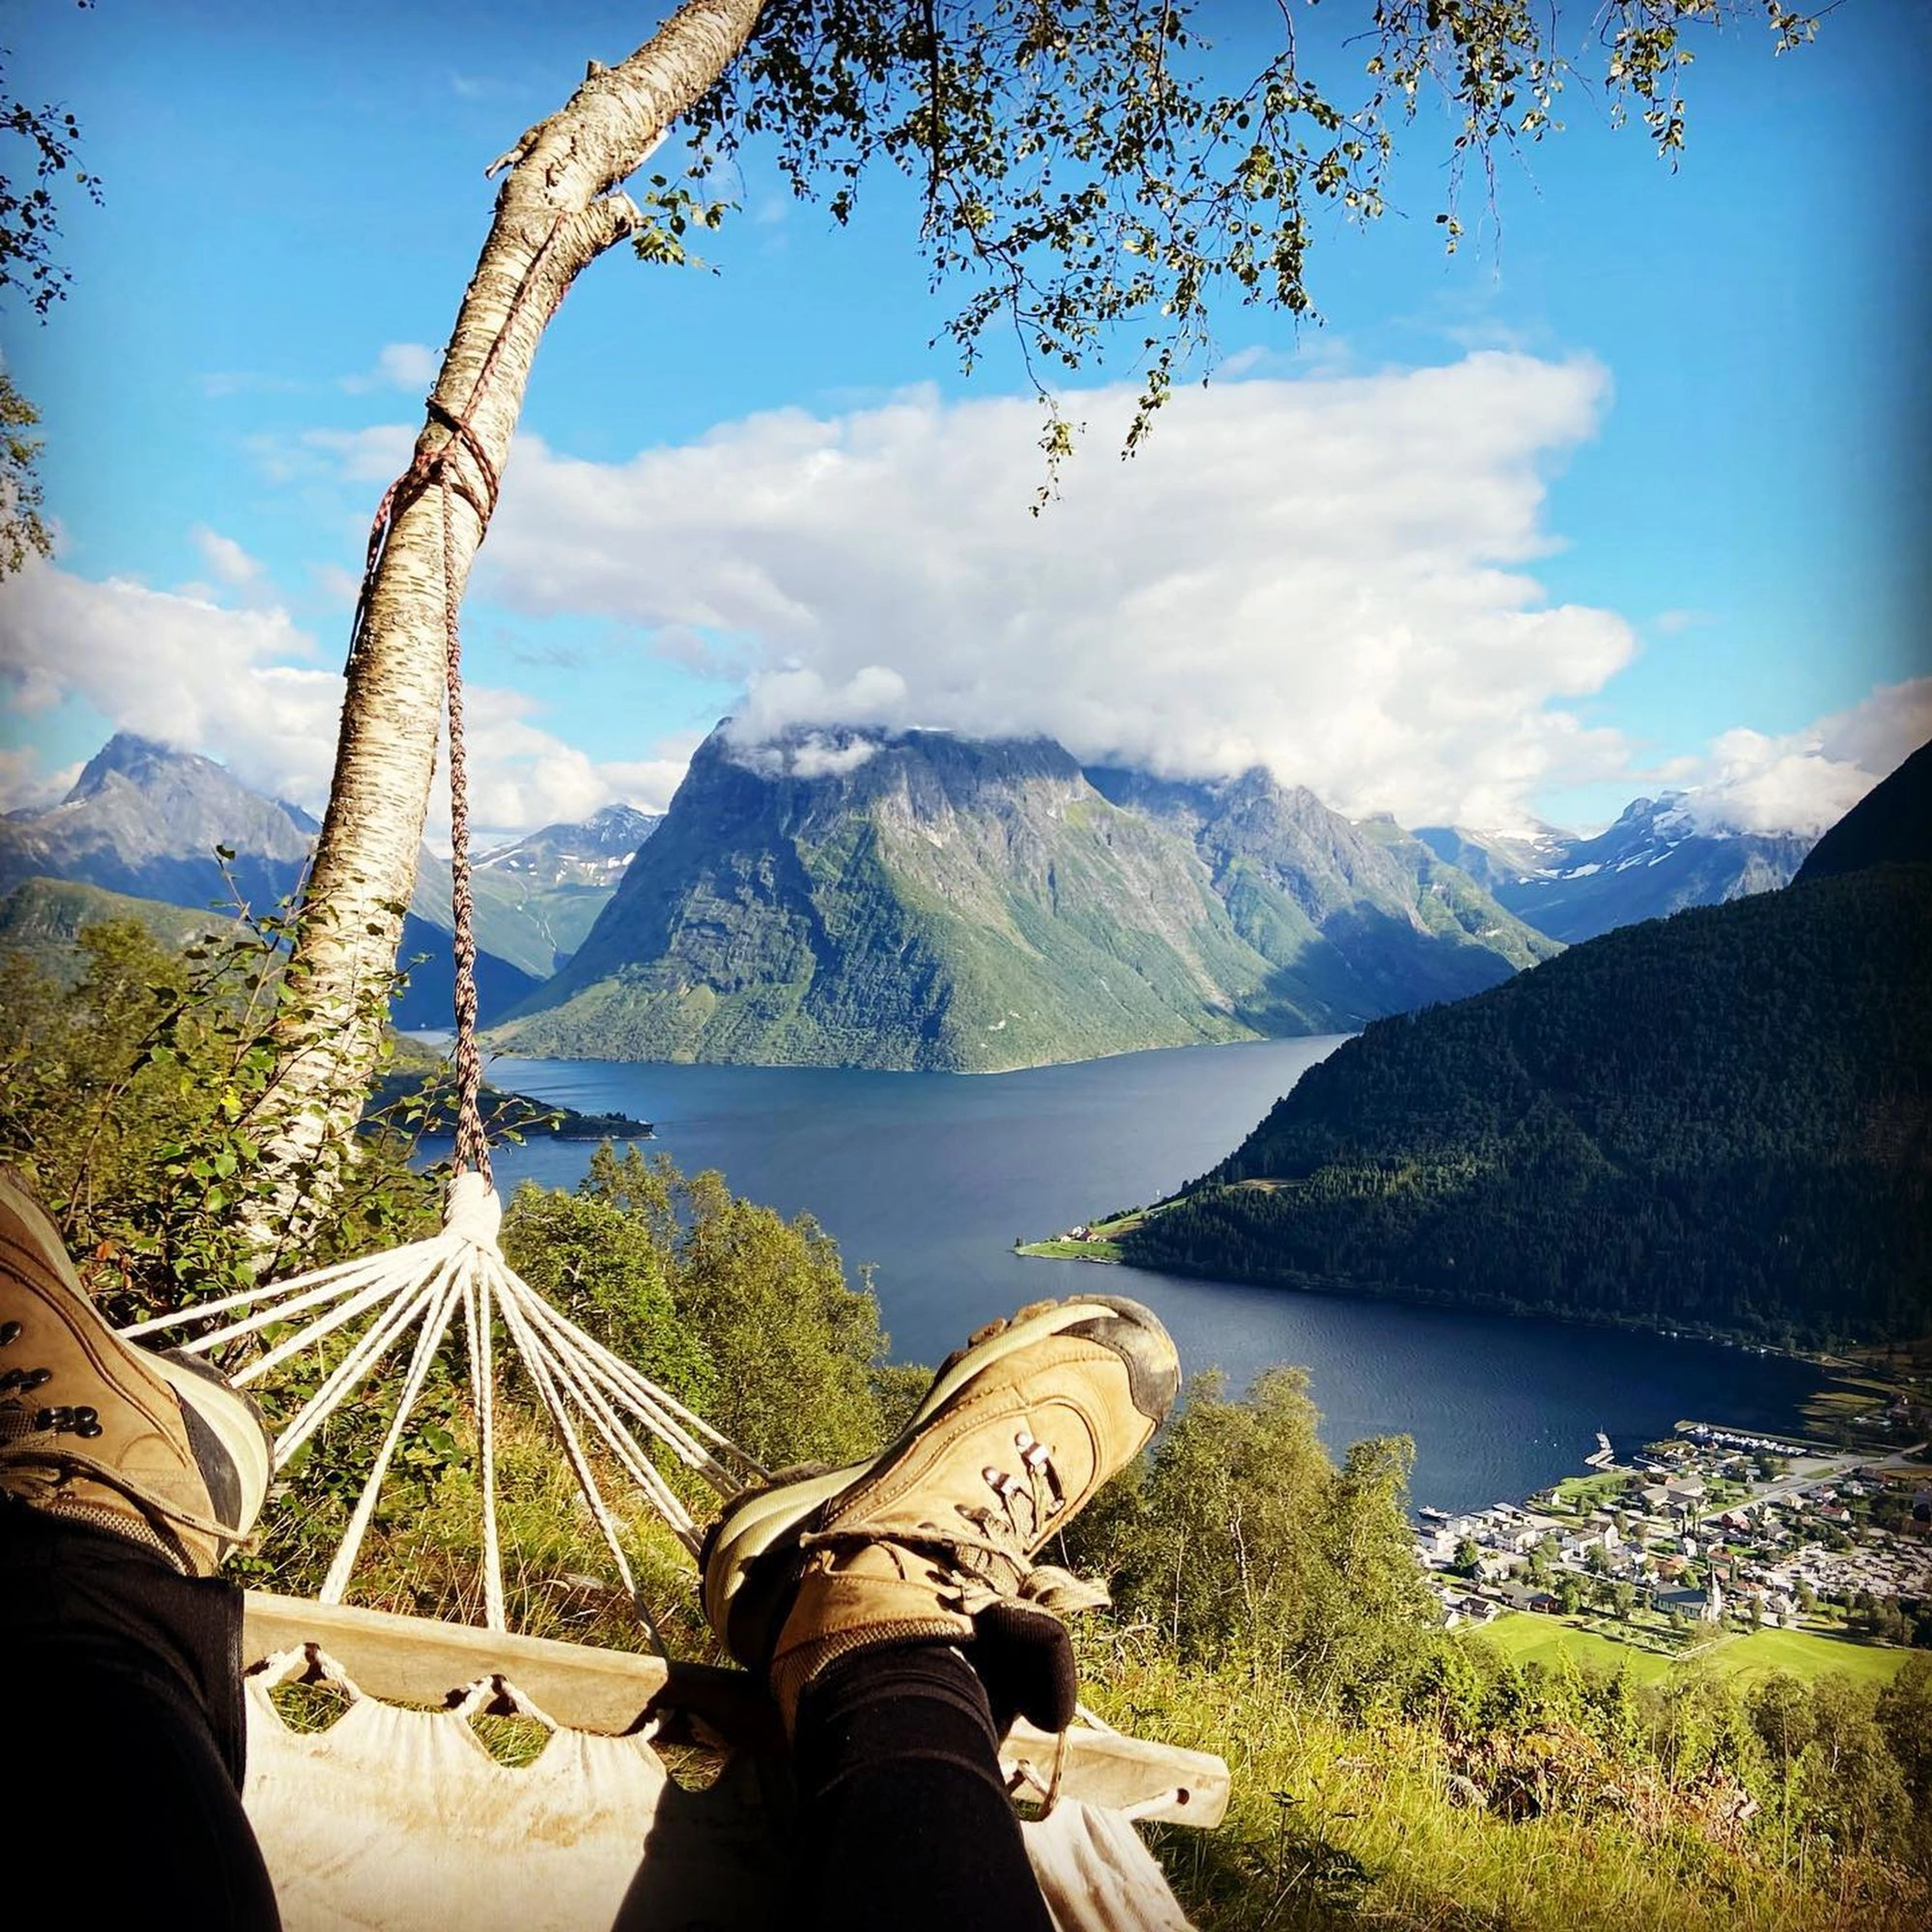 Relaxing time on hiking trip - Norway